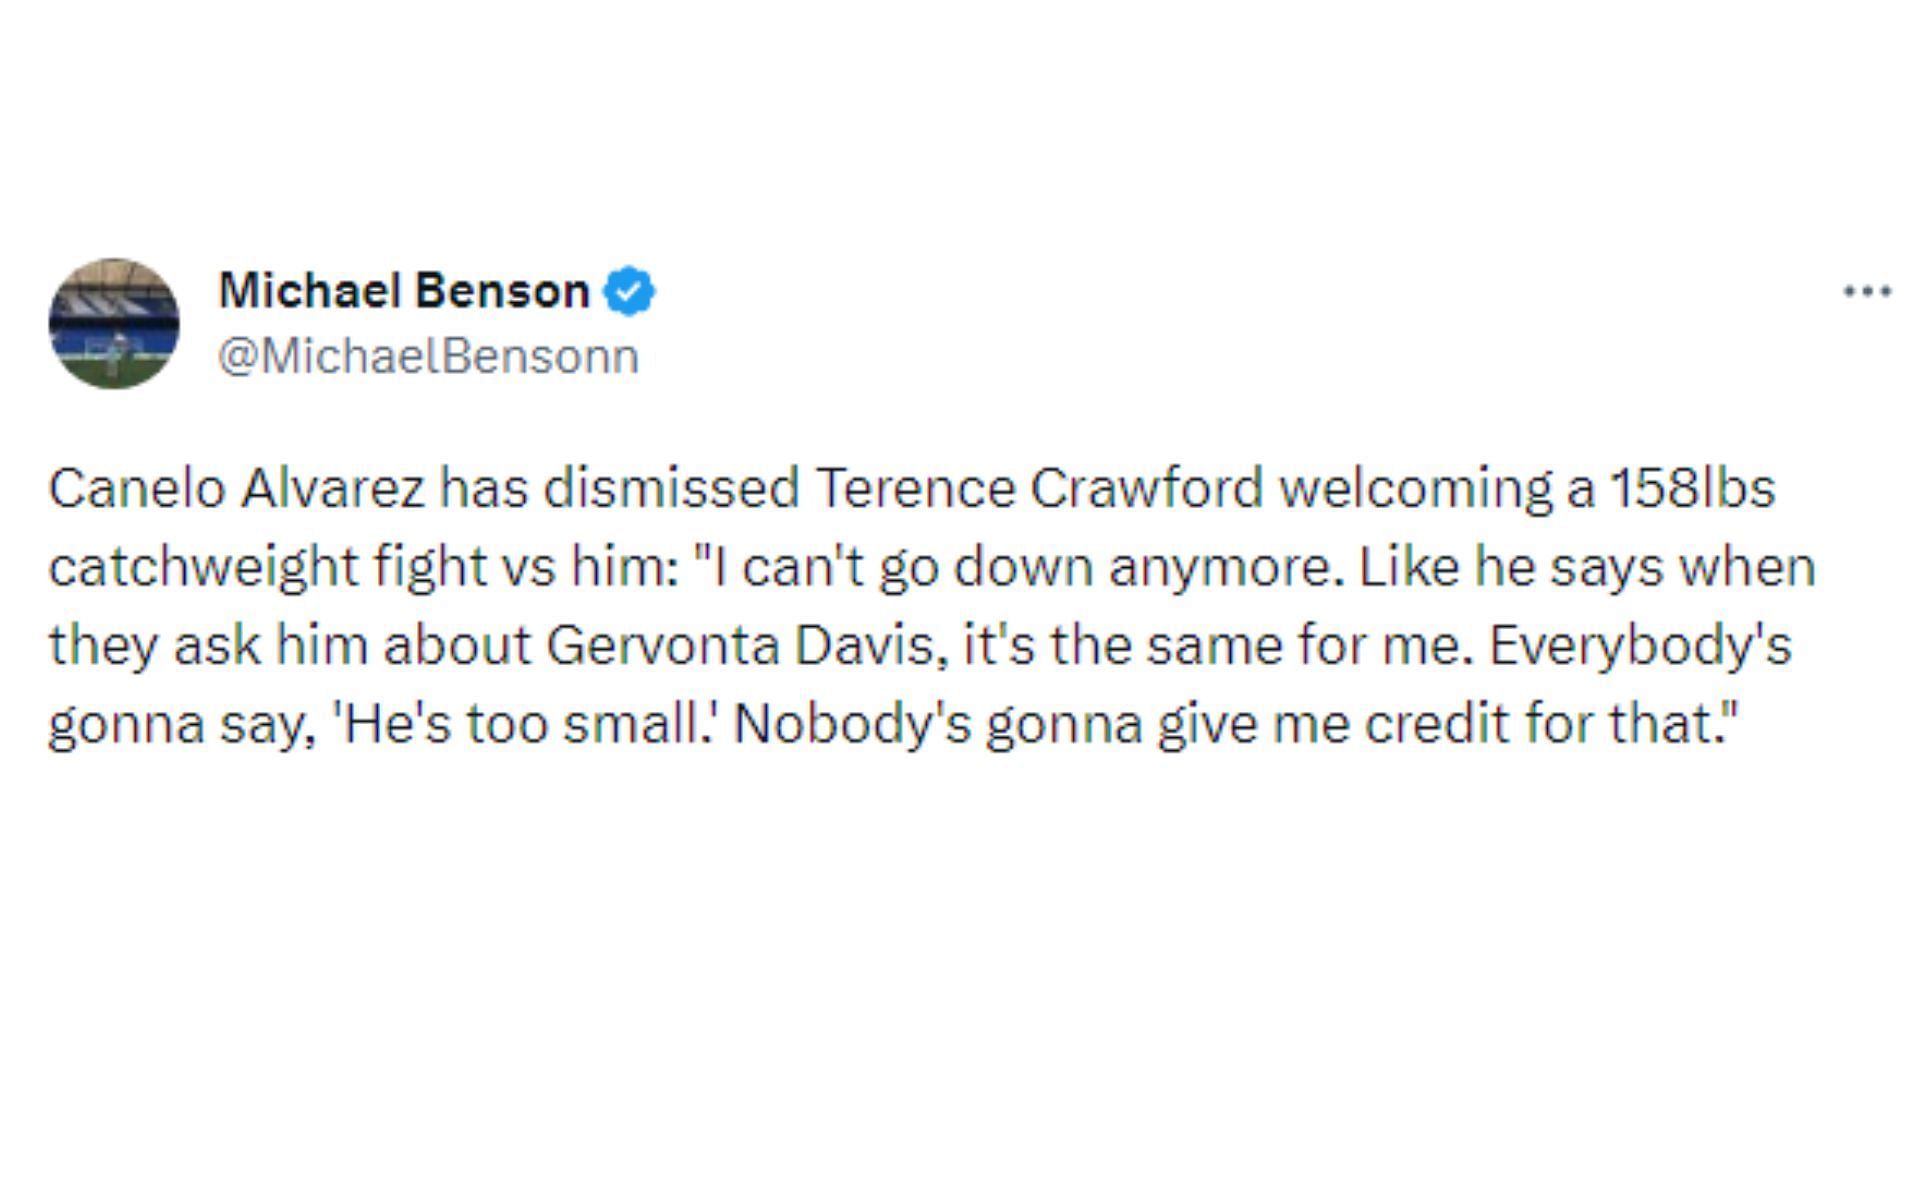 Tweet on Terence Crawford catchweight bout